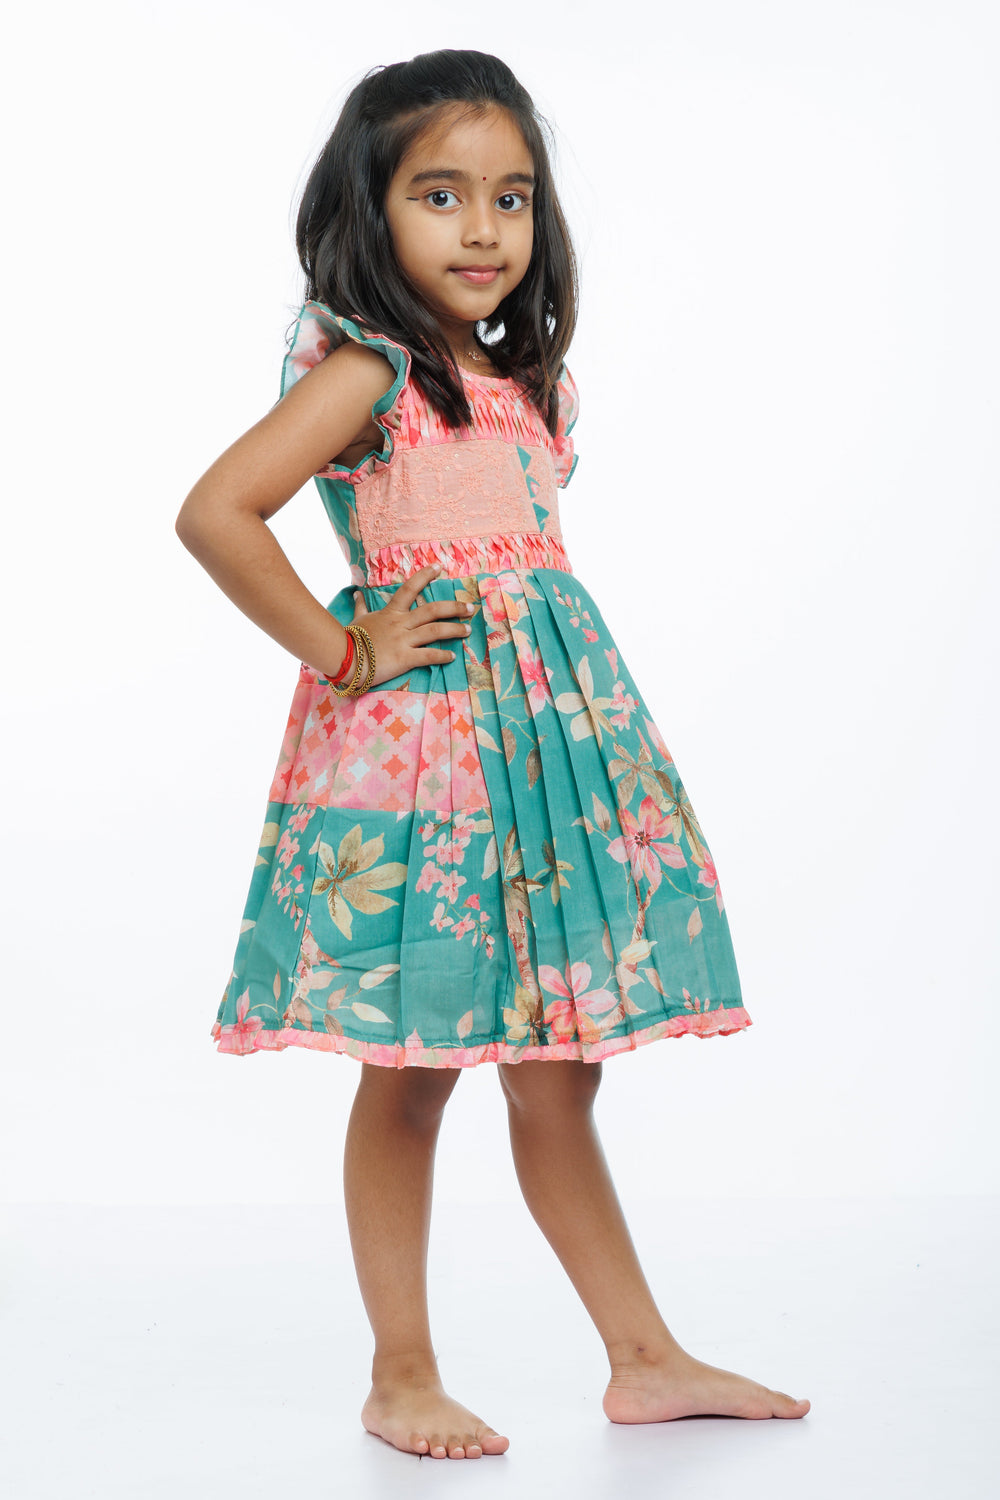 The Nesavu Girls Cotton Frock Girls Blossom Pleated Cotton Frock with Chikan Embroidery Nesavu Daily Wear Chic Cotton Floral Dress for Kids | Summer Fashion Essentials | The Nesavu